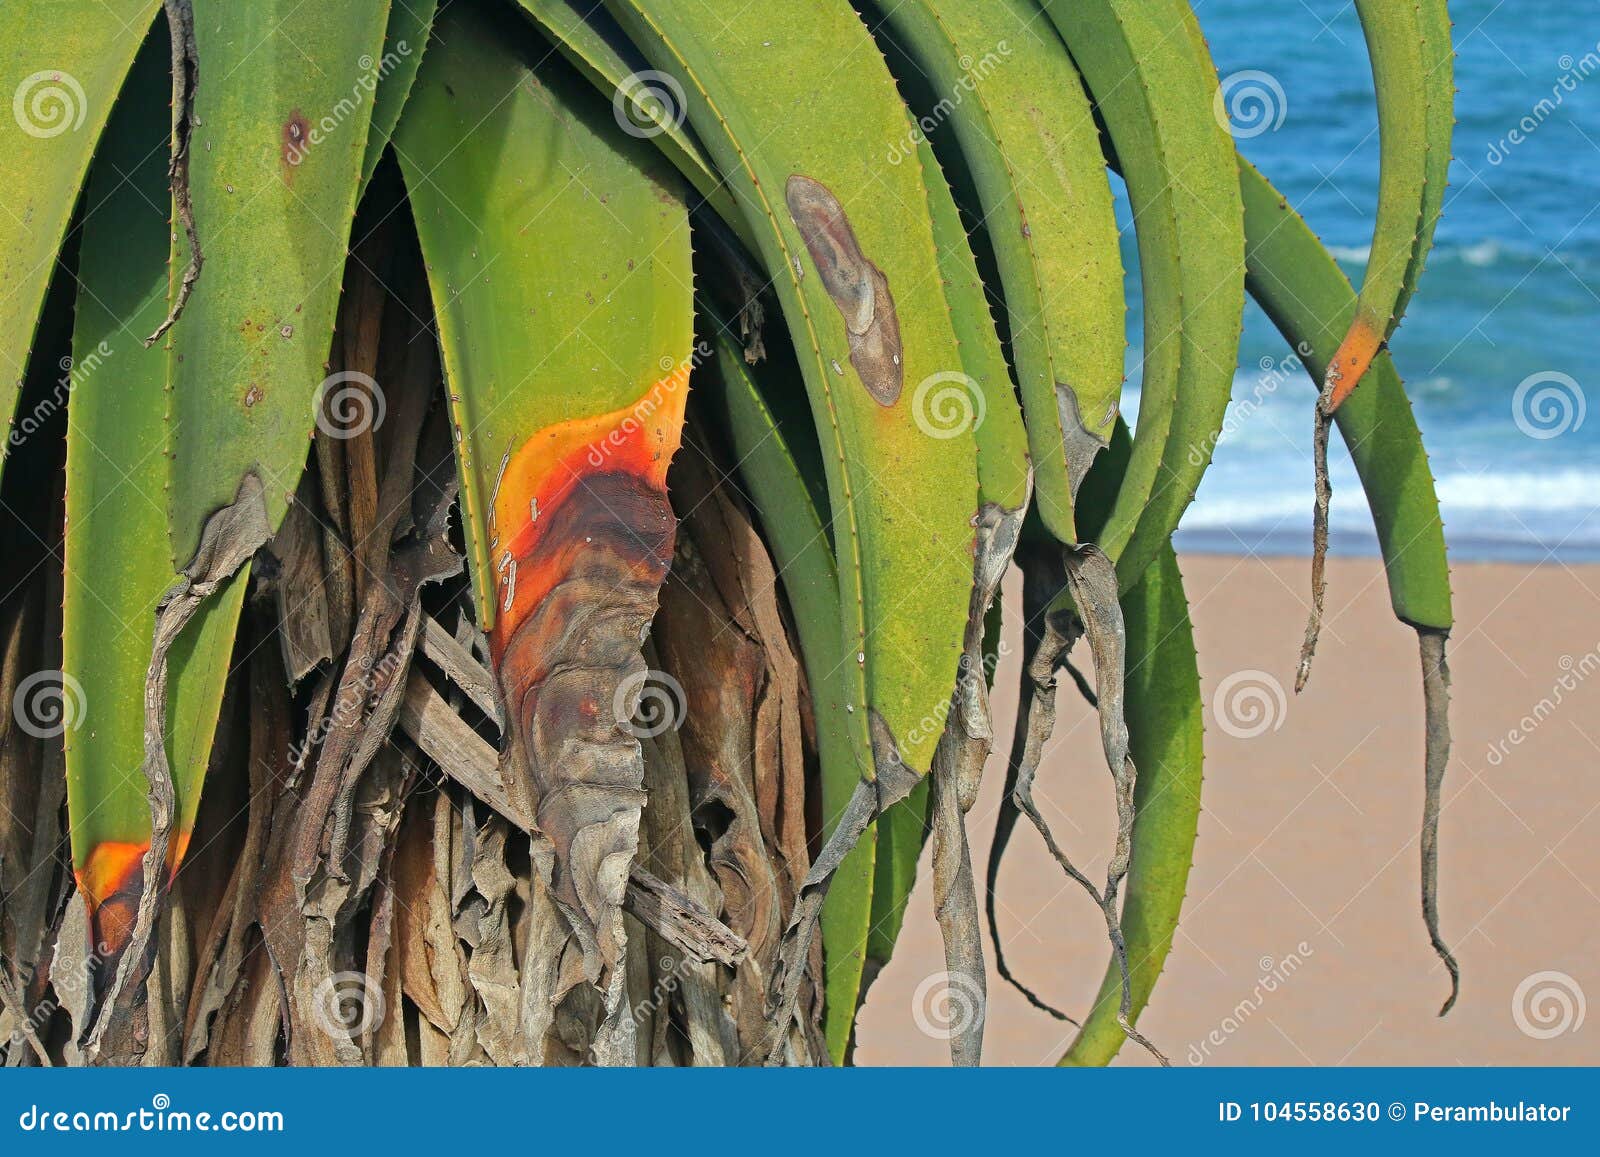 Green Aloe Plant On Beach With Dying Leaf Tips Stock Photo Image